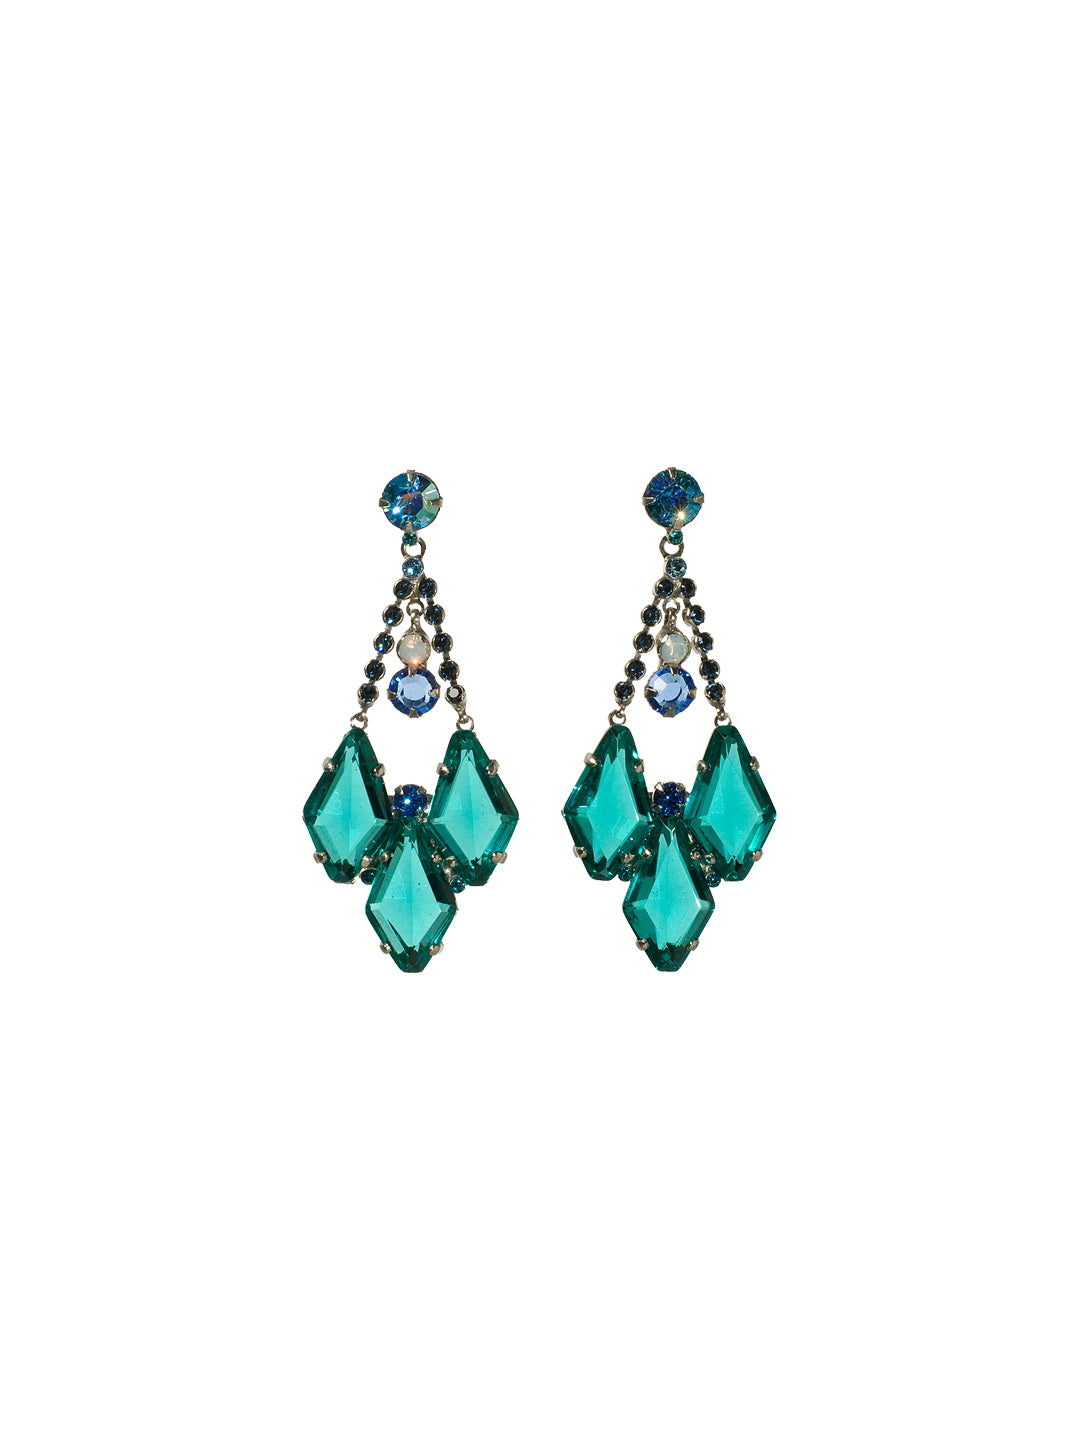 Fit For A Queen Crystal Chandelier Earring Dangle Earrings - ECG61ASEB - A classic Sorrelli style to make a statement or wear everyday. From Sorrelli's Electric Blue collection in our Antique Silver-tone finish.